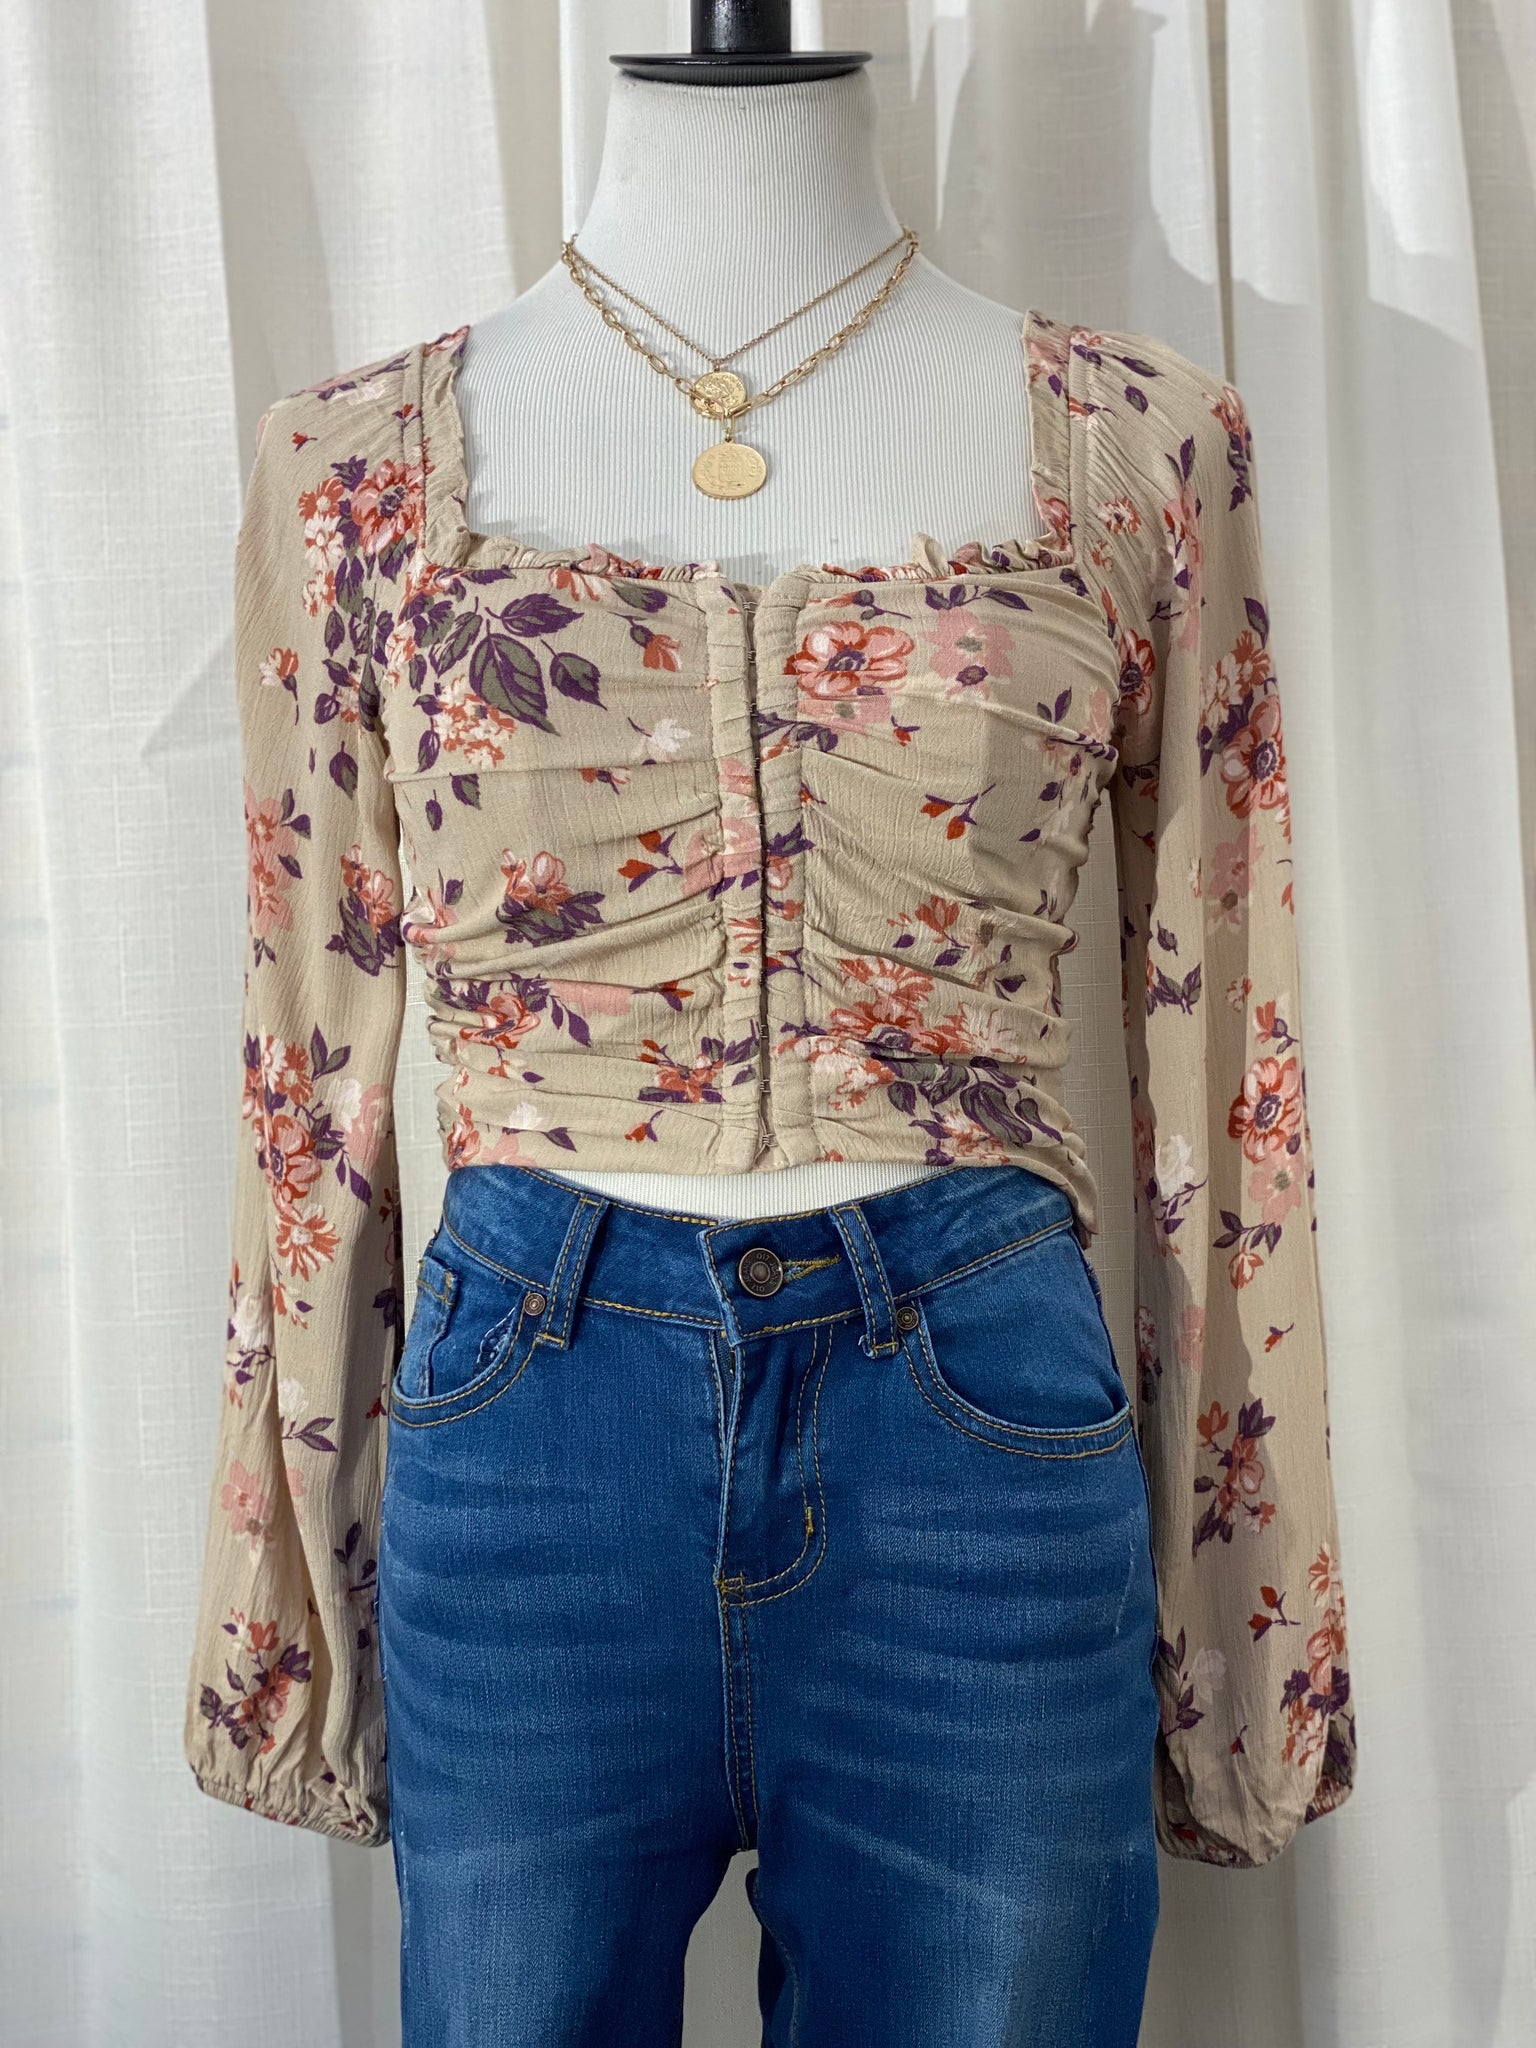 The “Keep It Flirty” Floral Corset Top